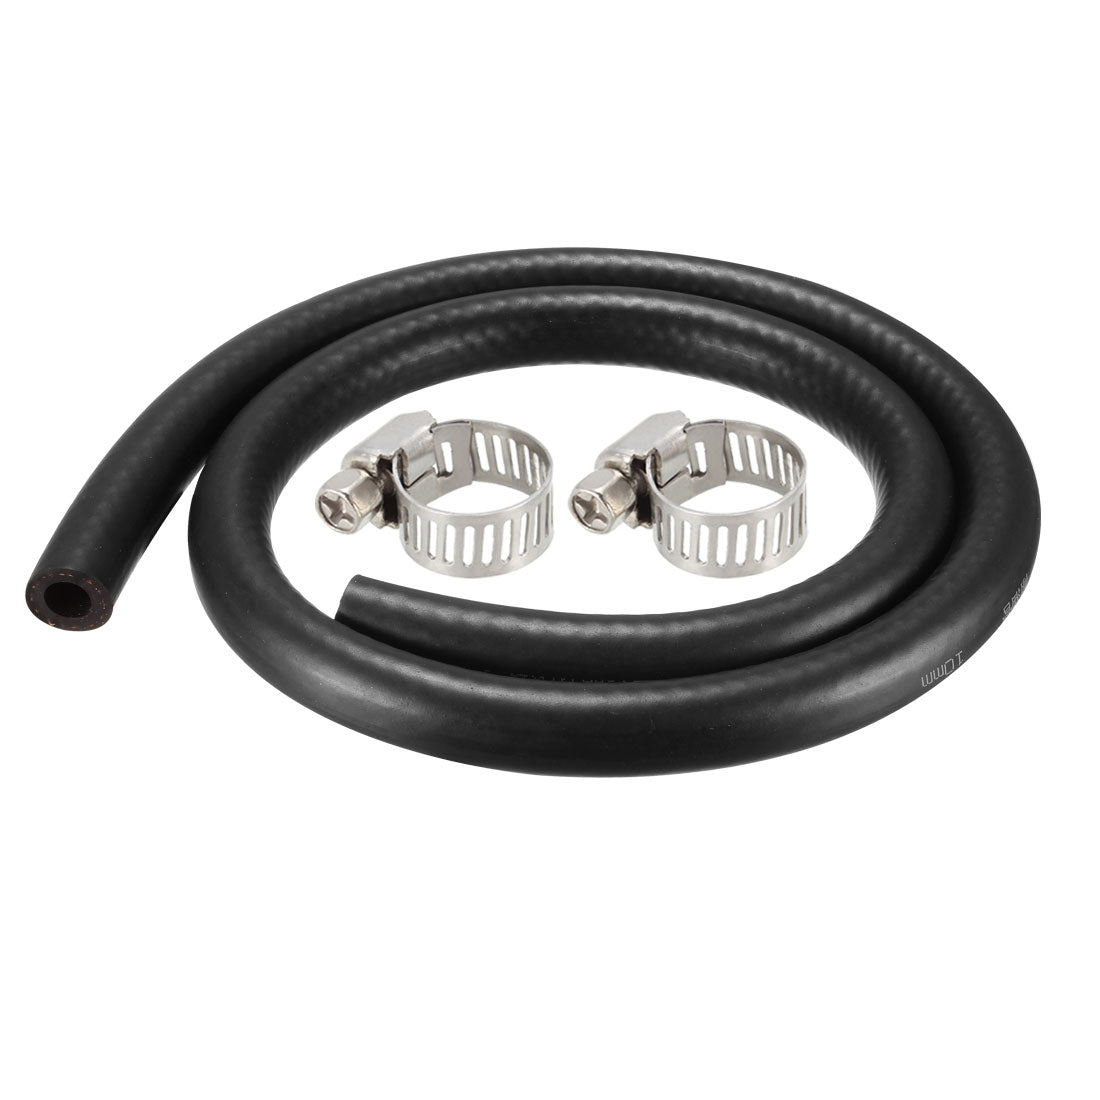 uxcell Uxcell Fuel Line Fuel Hose Rubber  10mm I.D.  0.9M/2.95FT  Diesel Petrol Hose Engine Pipe Tubing with 2 Clamps